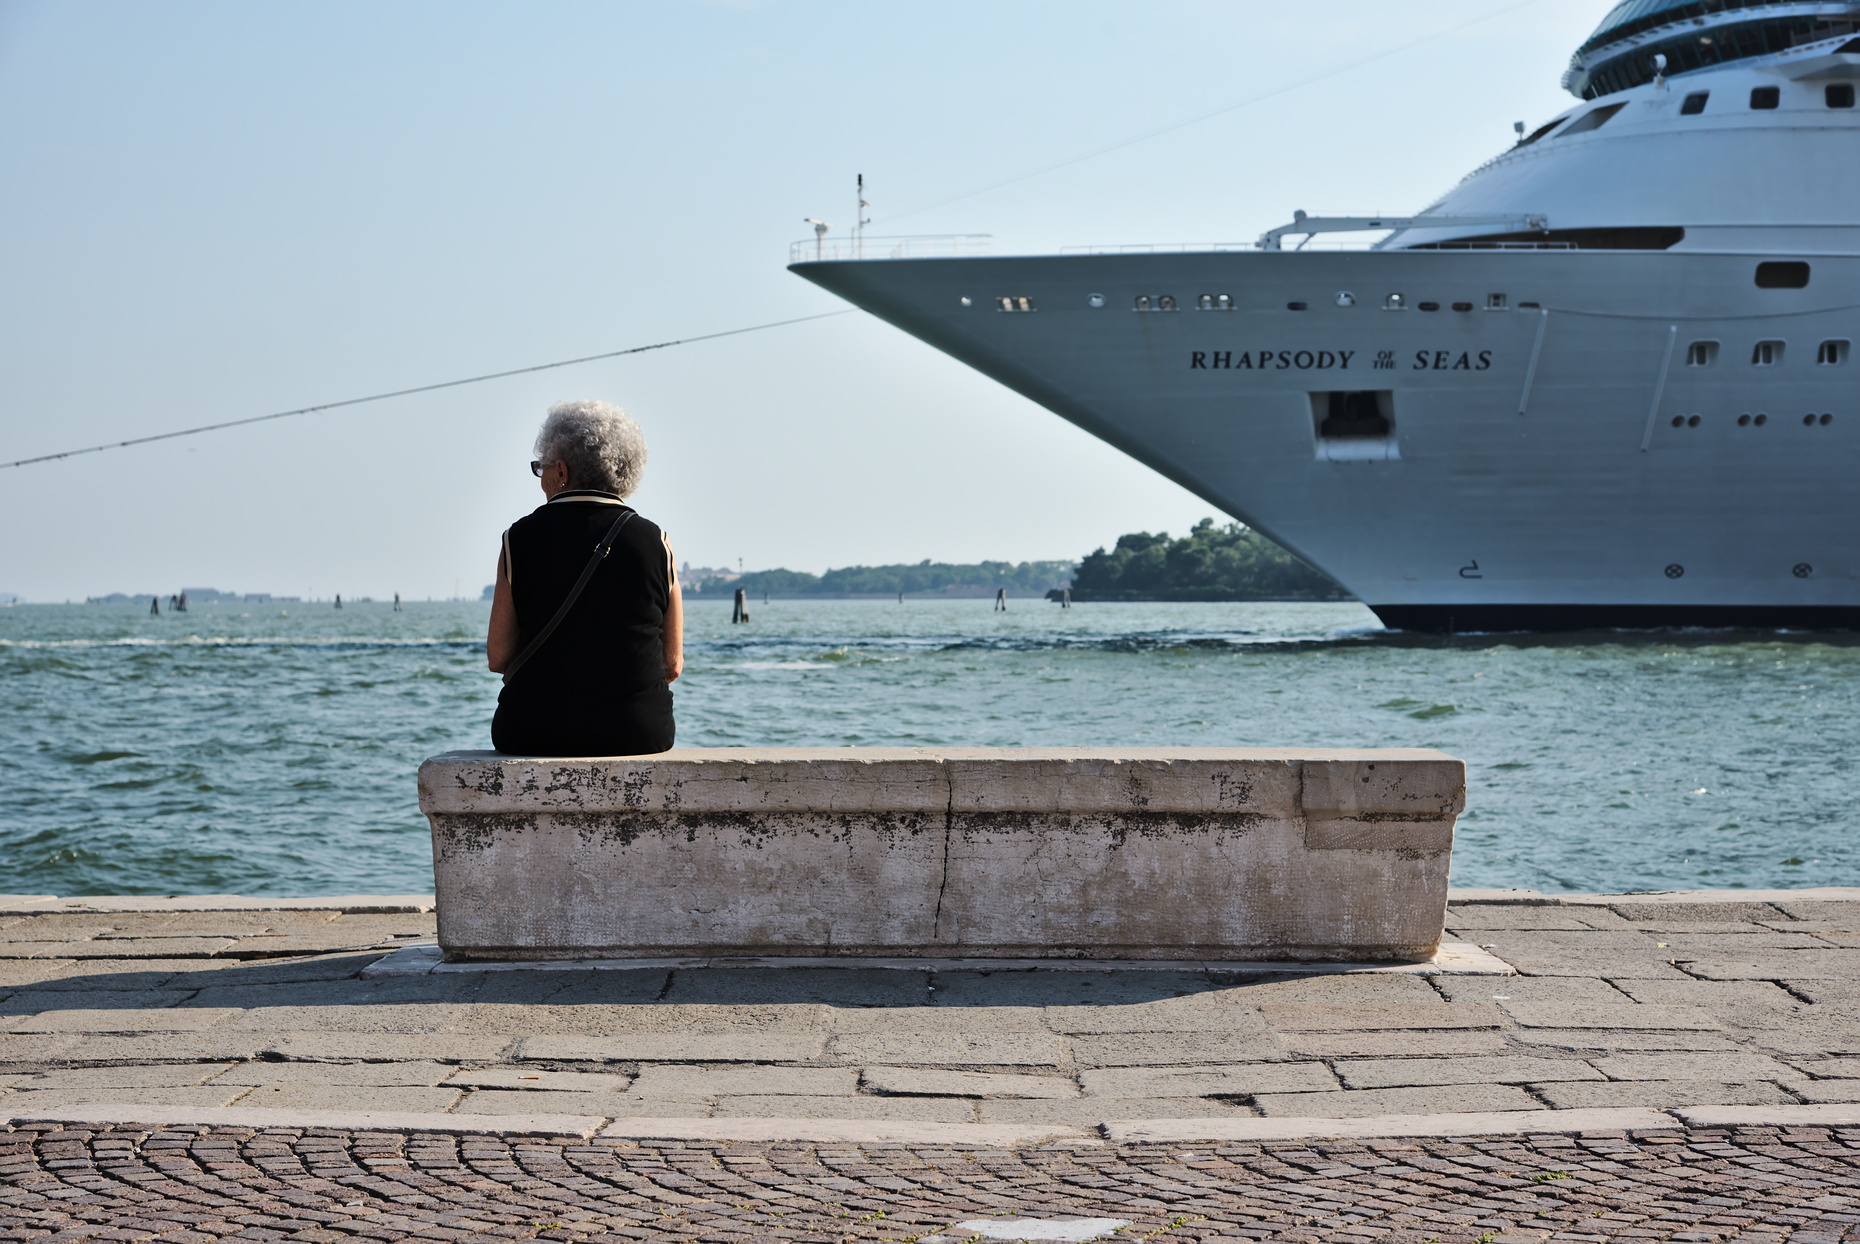 Woman sitting on bench in Venice, with a criuse ship approacing